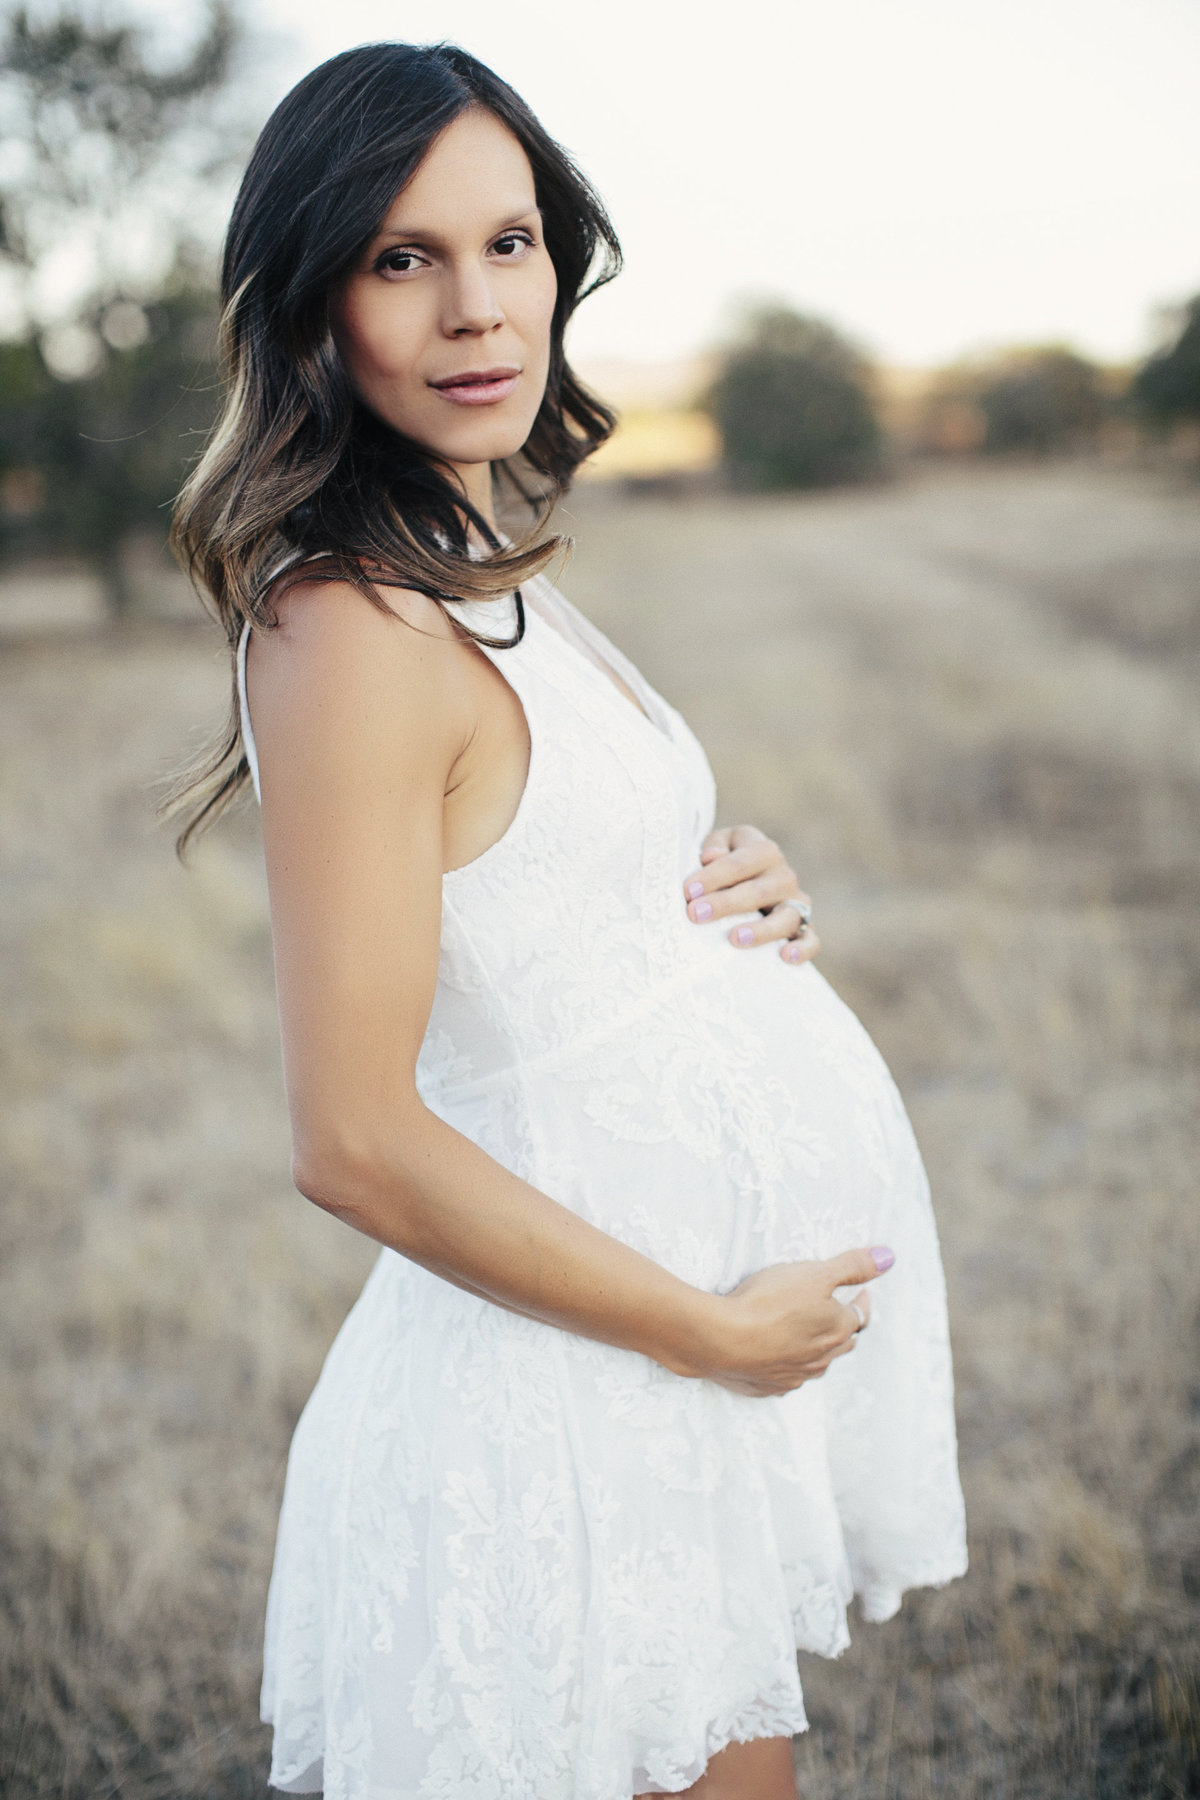 C0526_Mewes_Maternity_548T